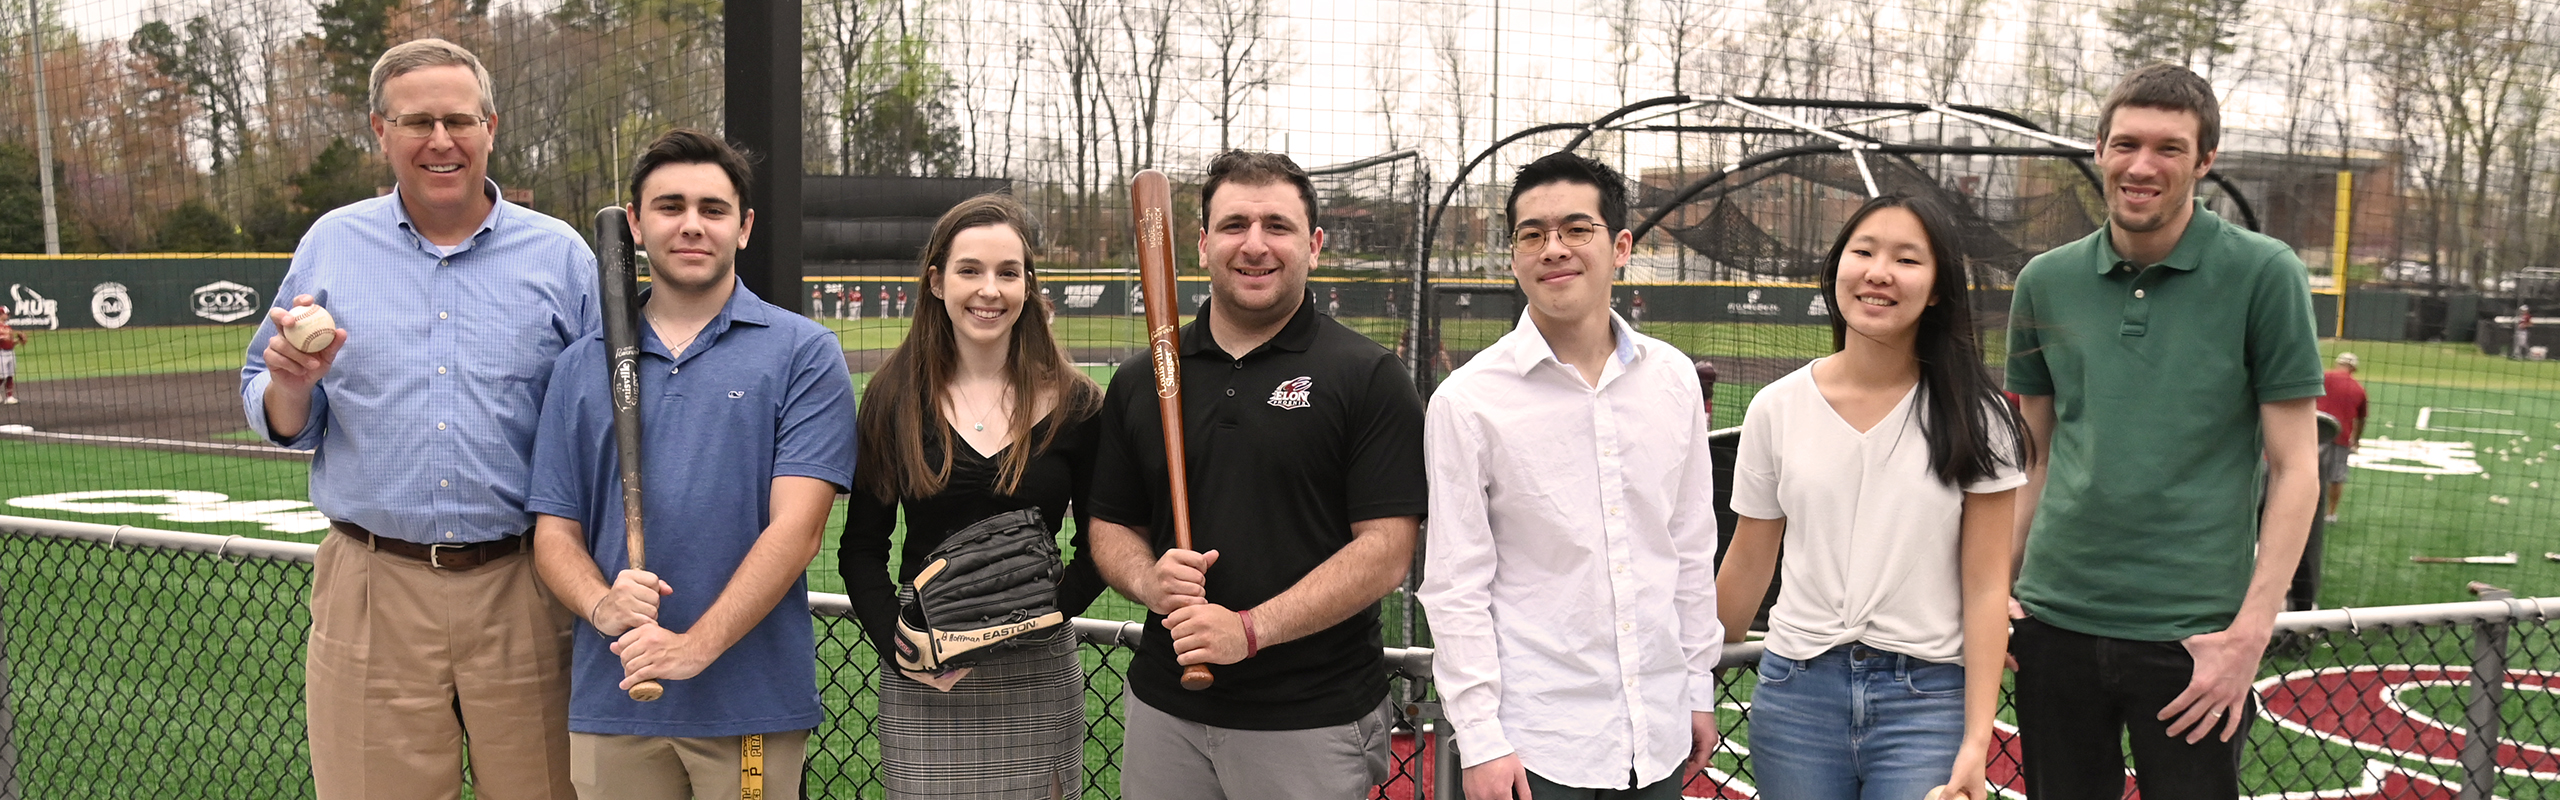 A group of Elon University students pose with baseball gear following a successful entry in the SABR case competition.